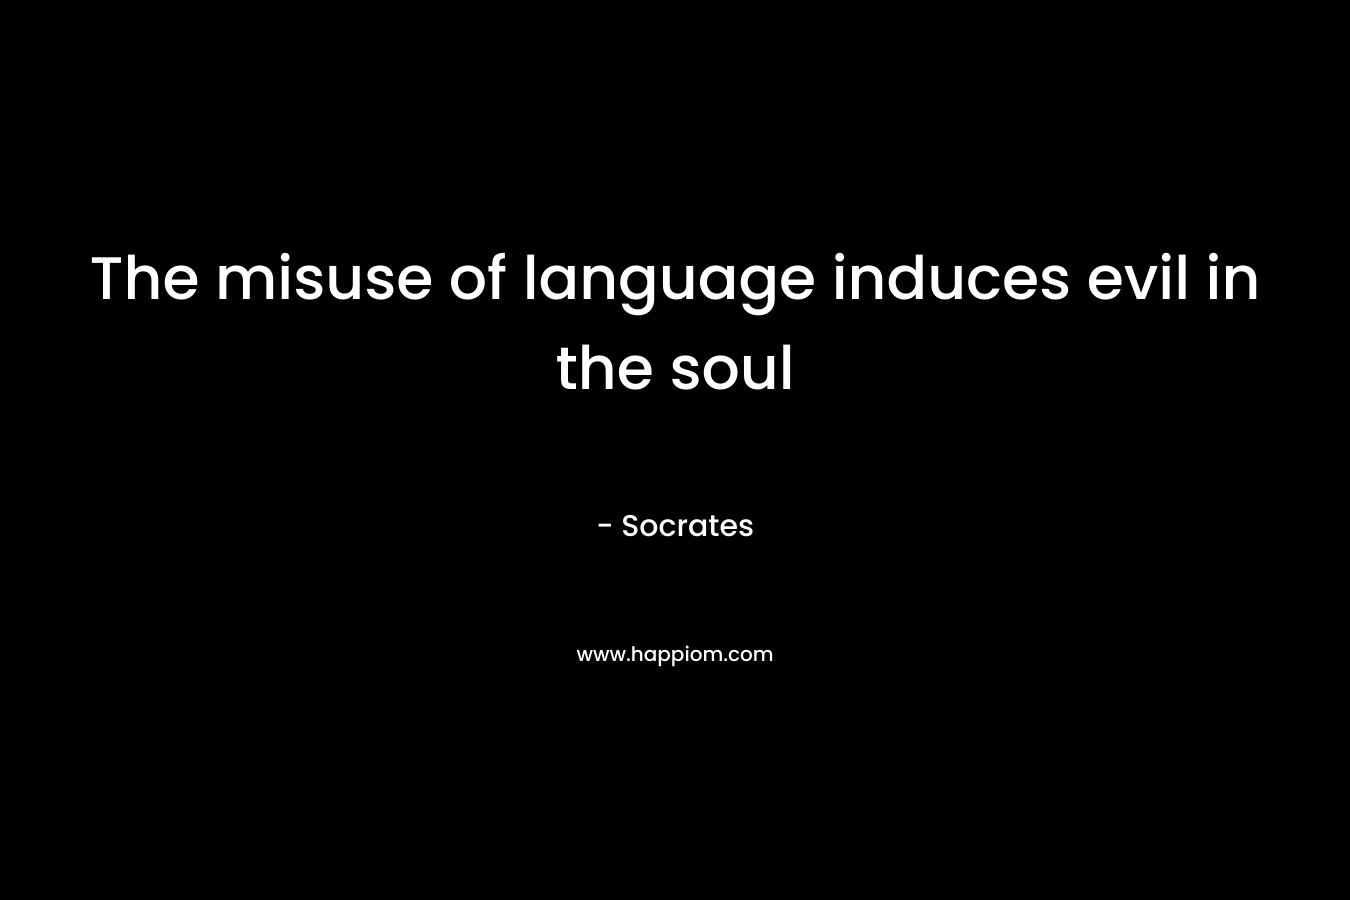 The misuse of language induces evil in the soul – Socrates